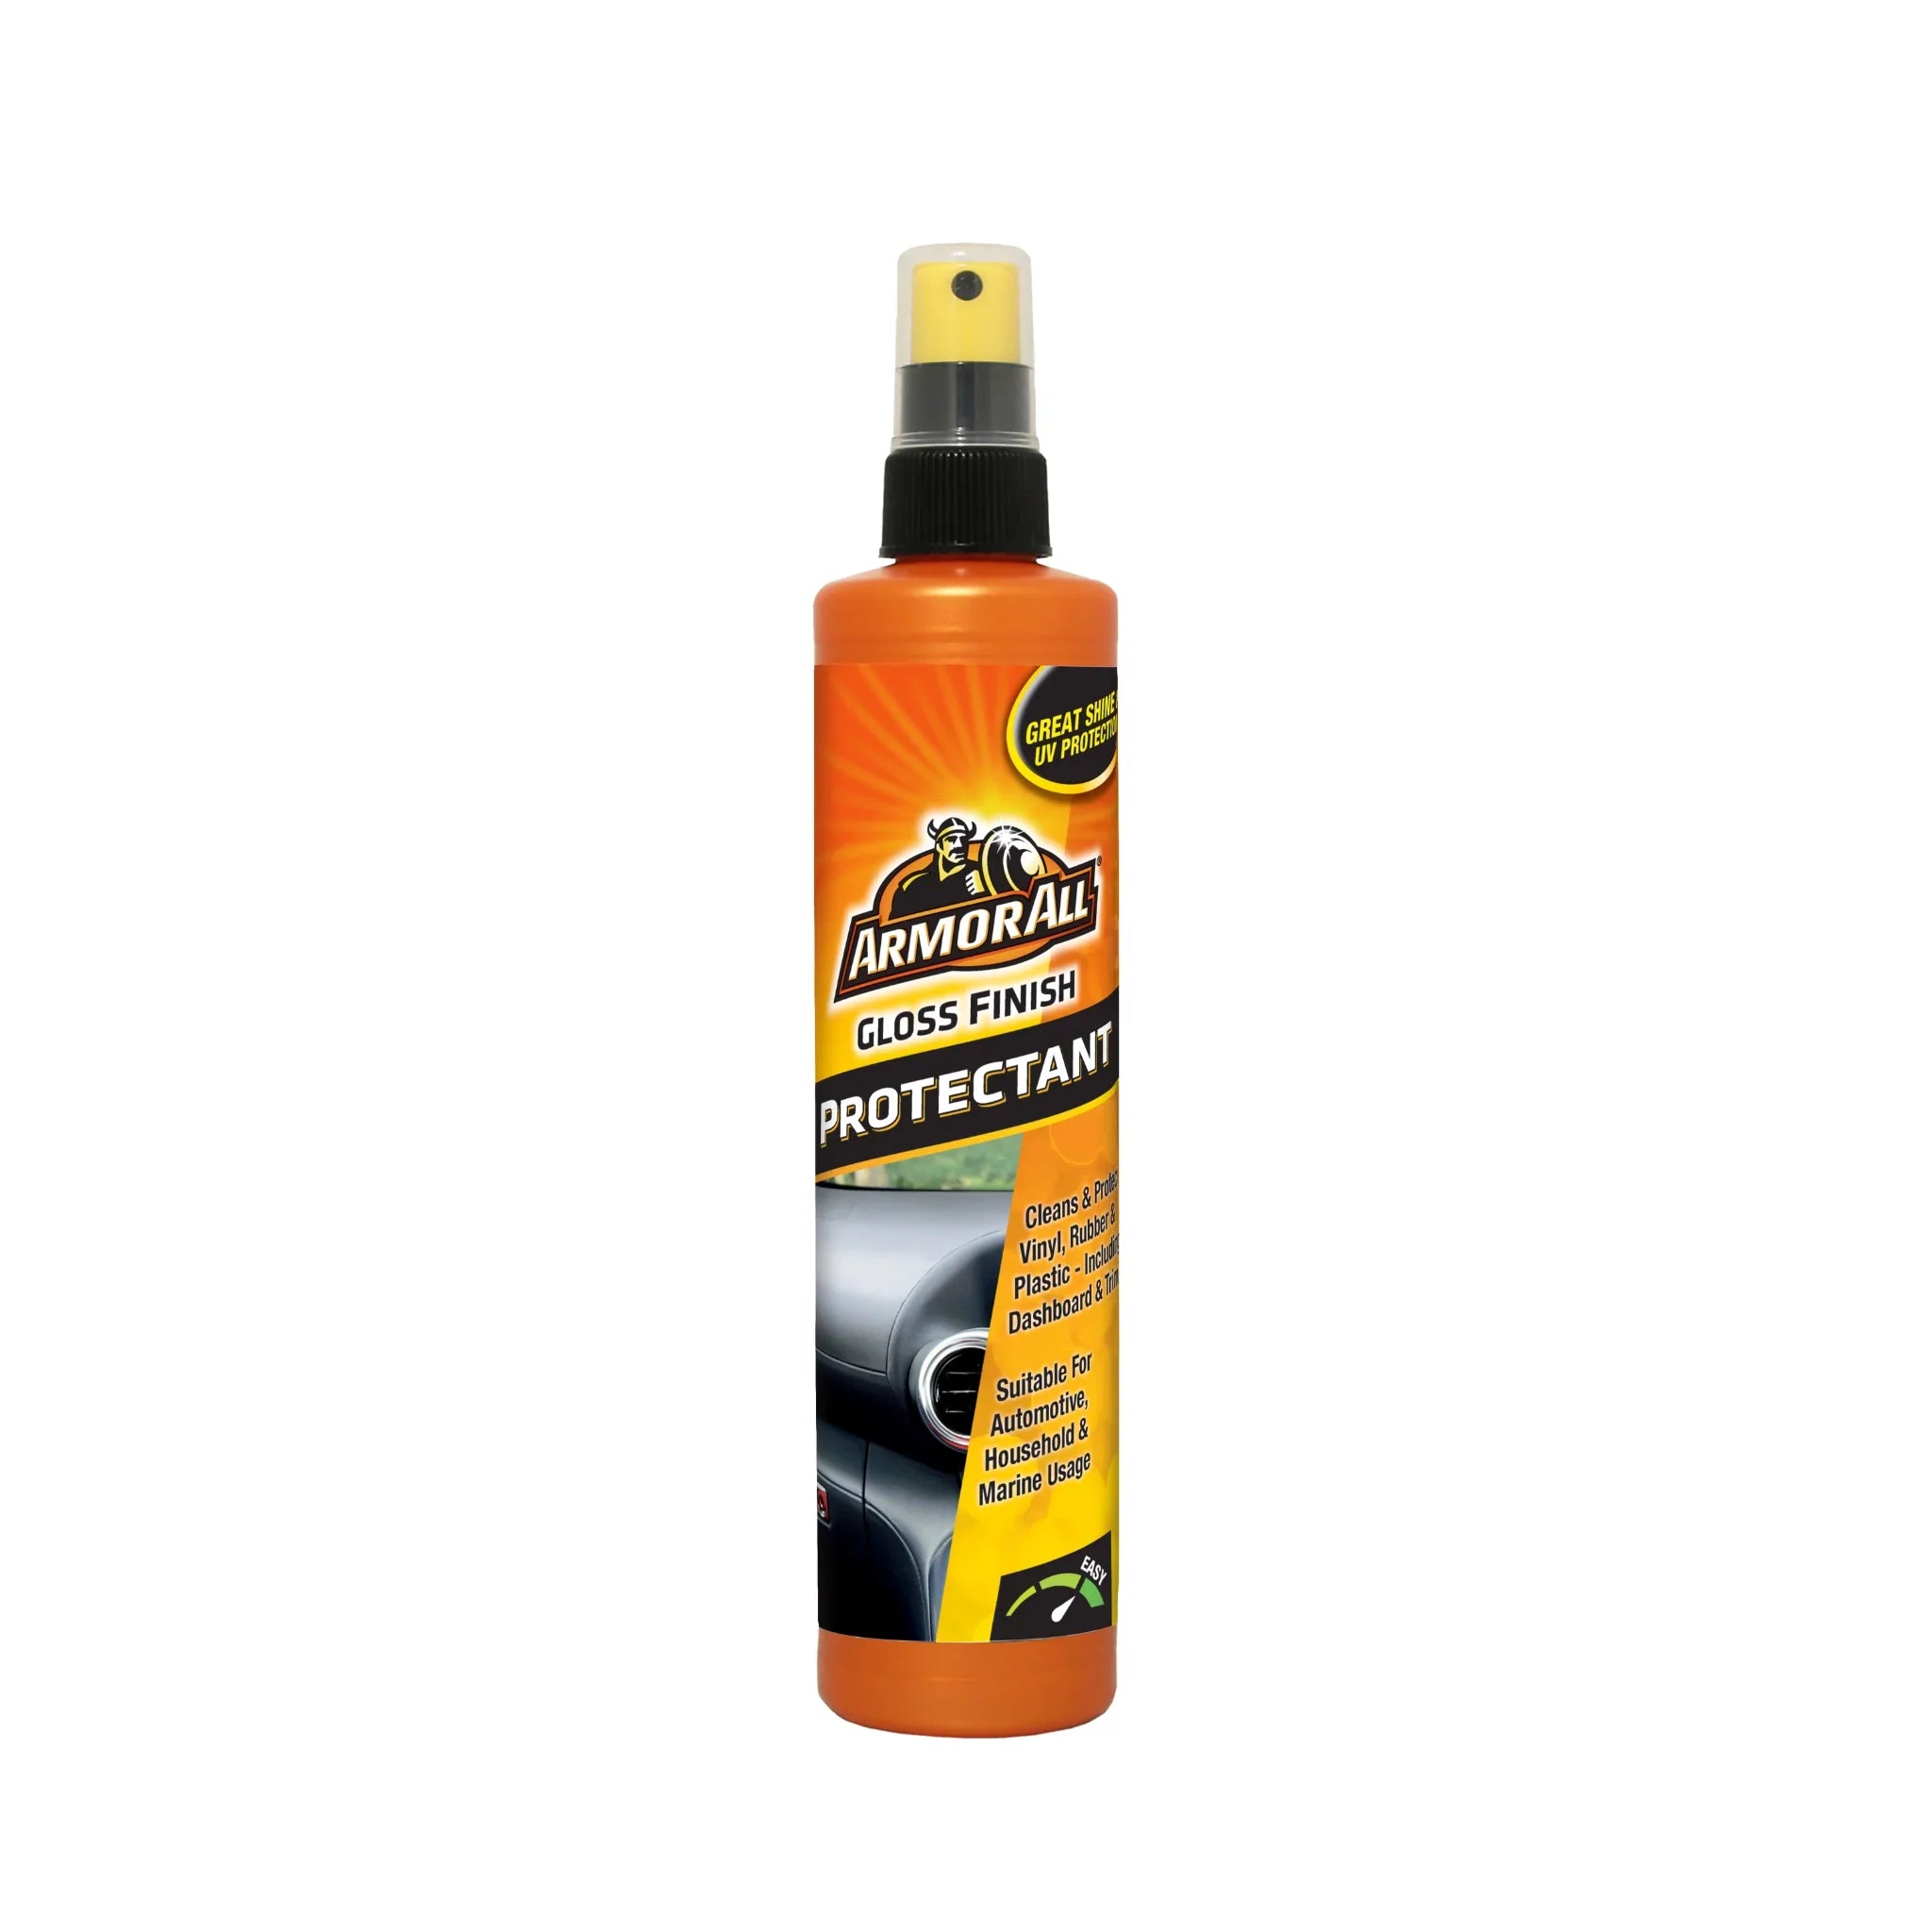 ArmorAll Protectant Gloss Finish 300ml